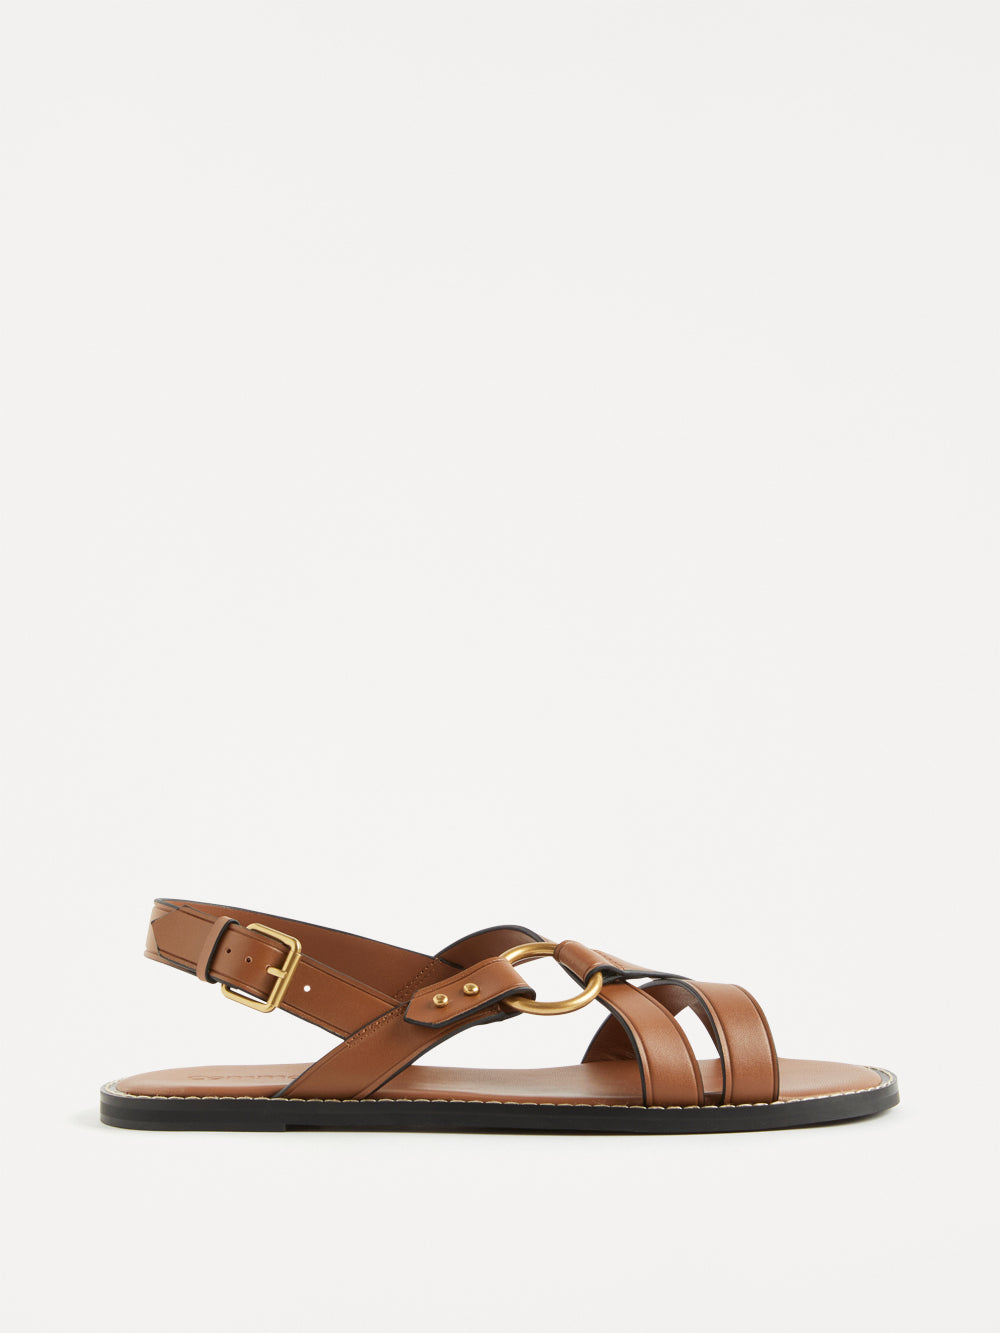 The Tamsin Leather Sandal